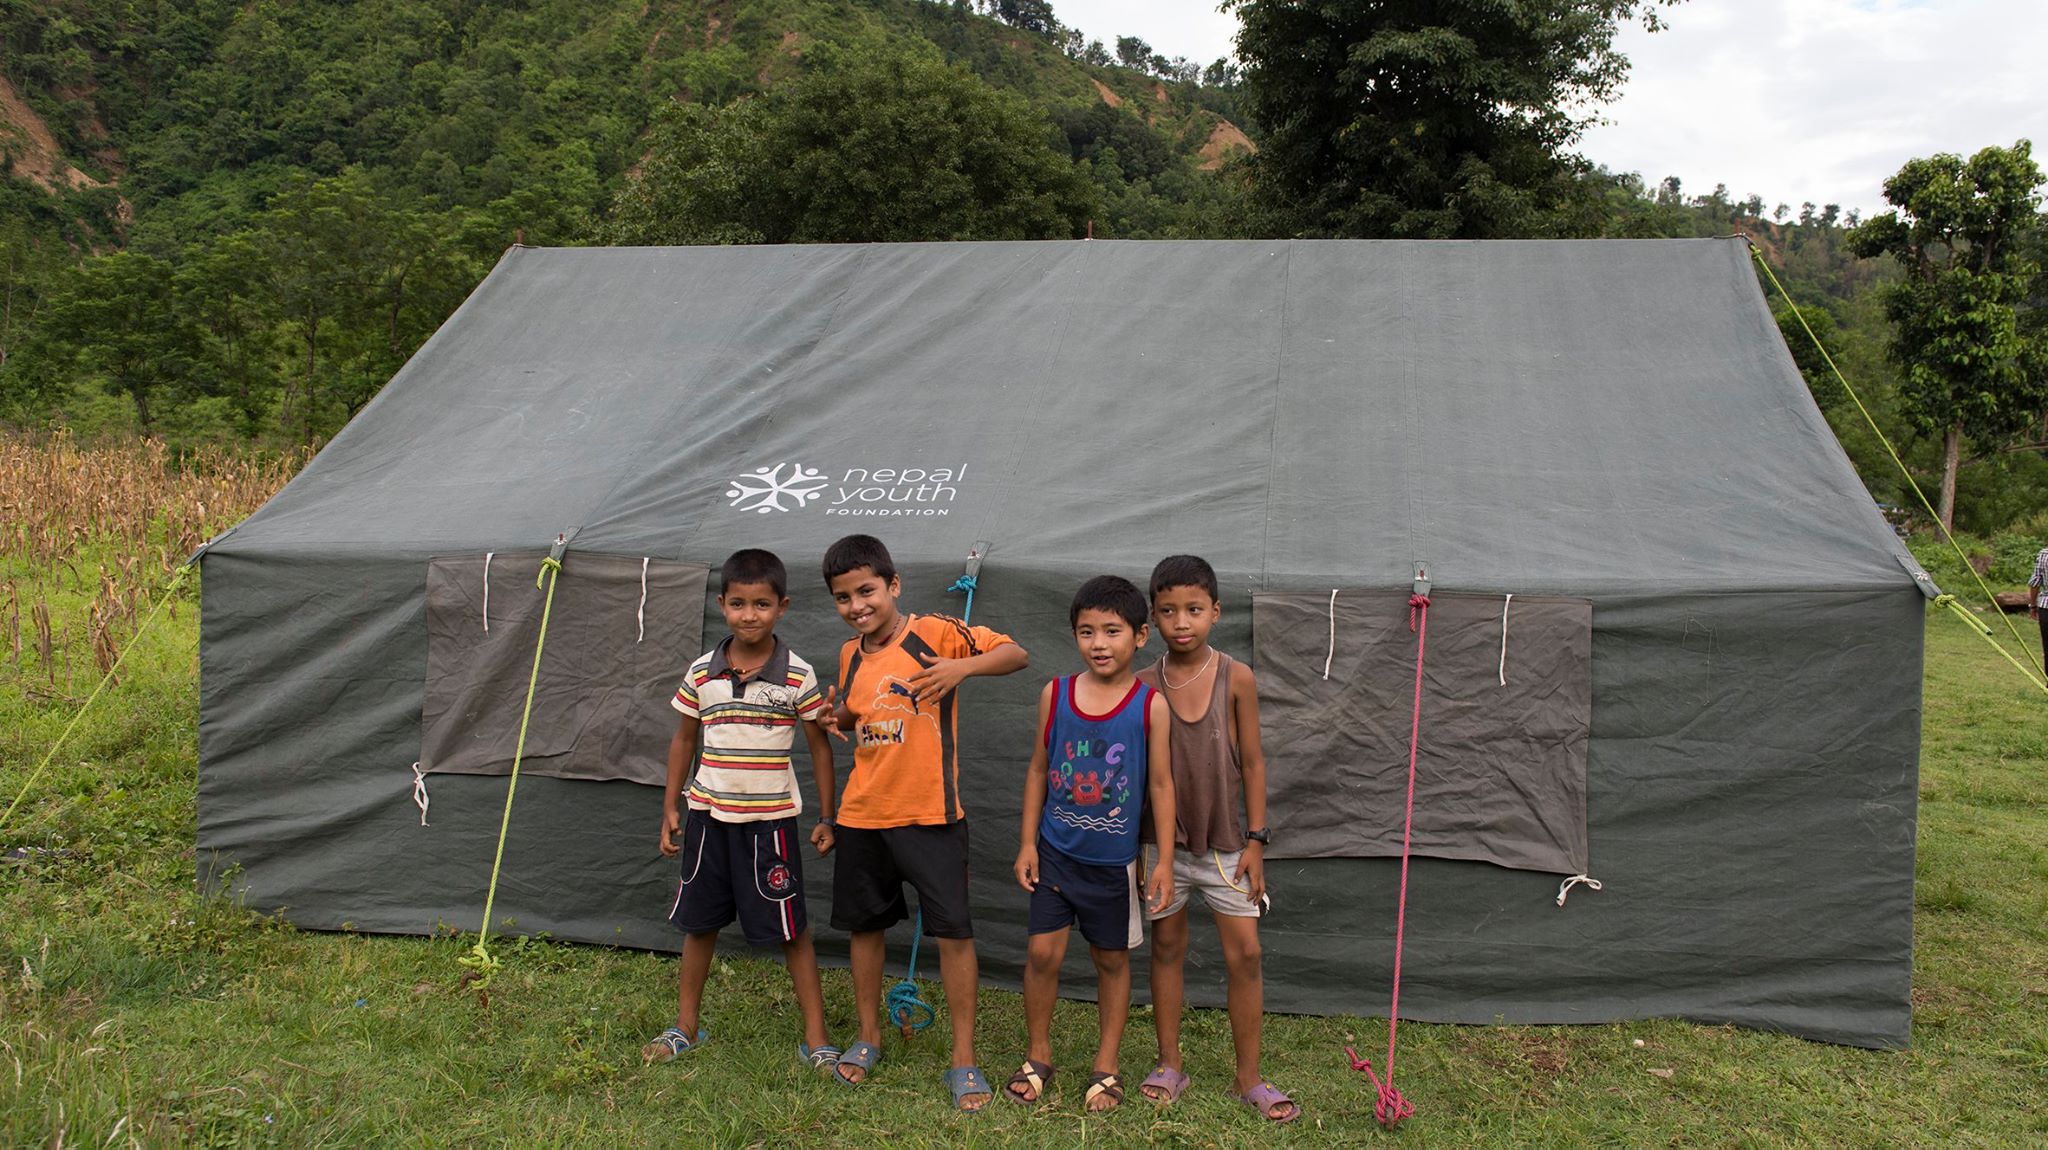 Four young boys stand smiling in front of a 20-person tent emblazoned with the NYF logo, green grass underfoot.